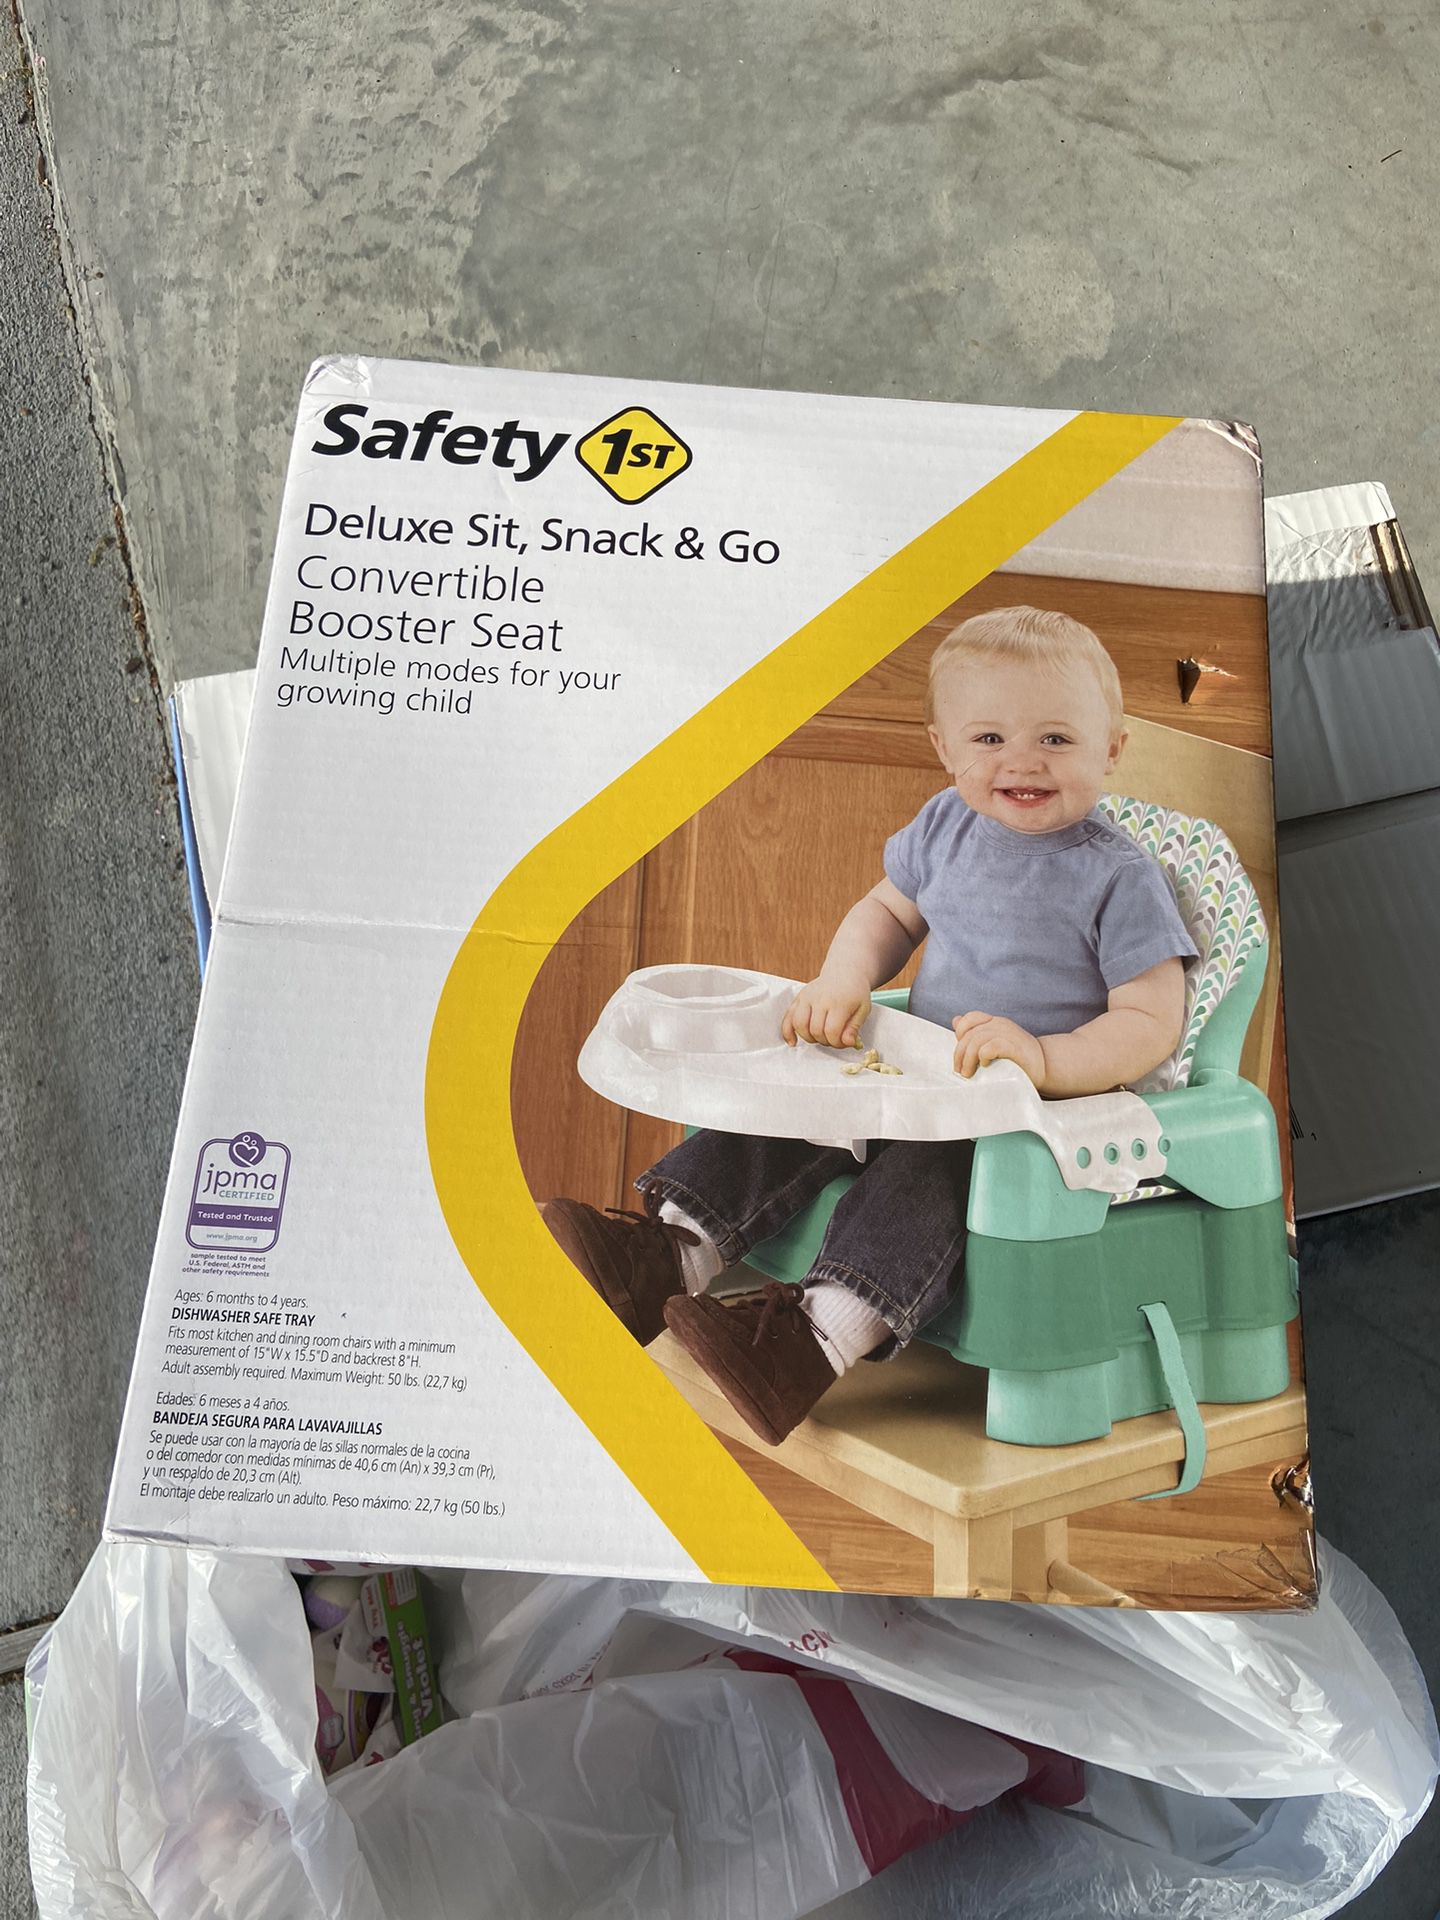 Baby Convertible Booster Seat - $11 Brand New 